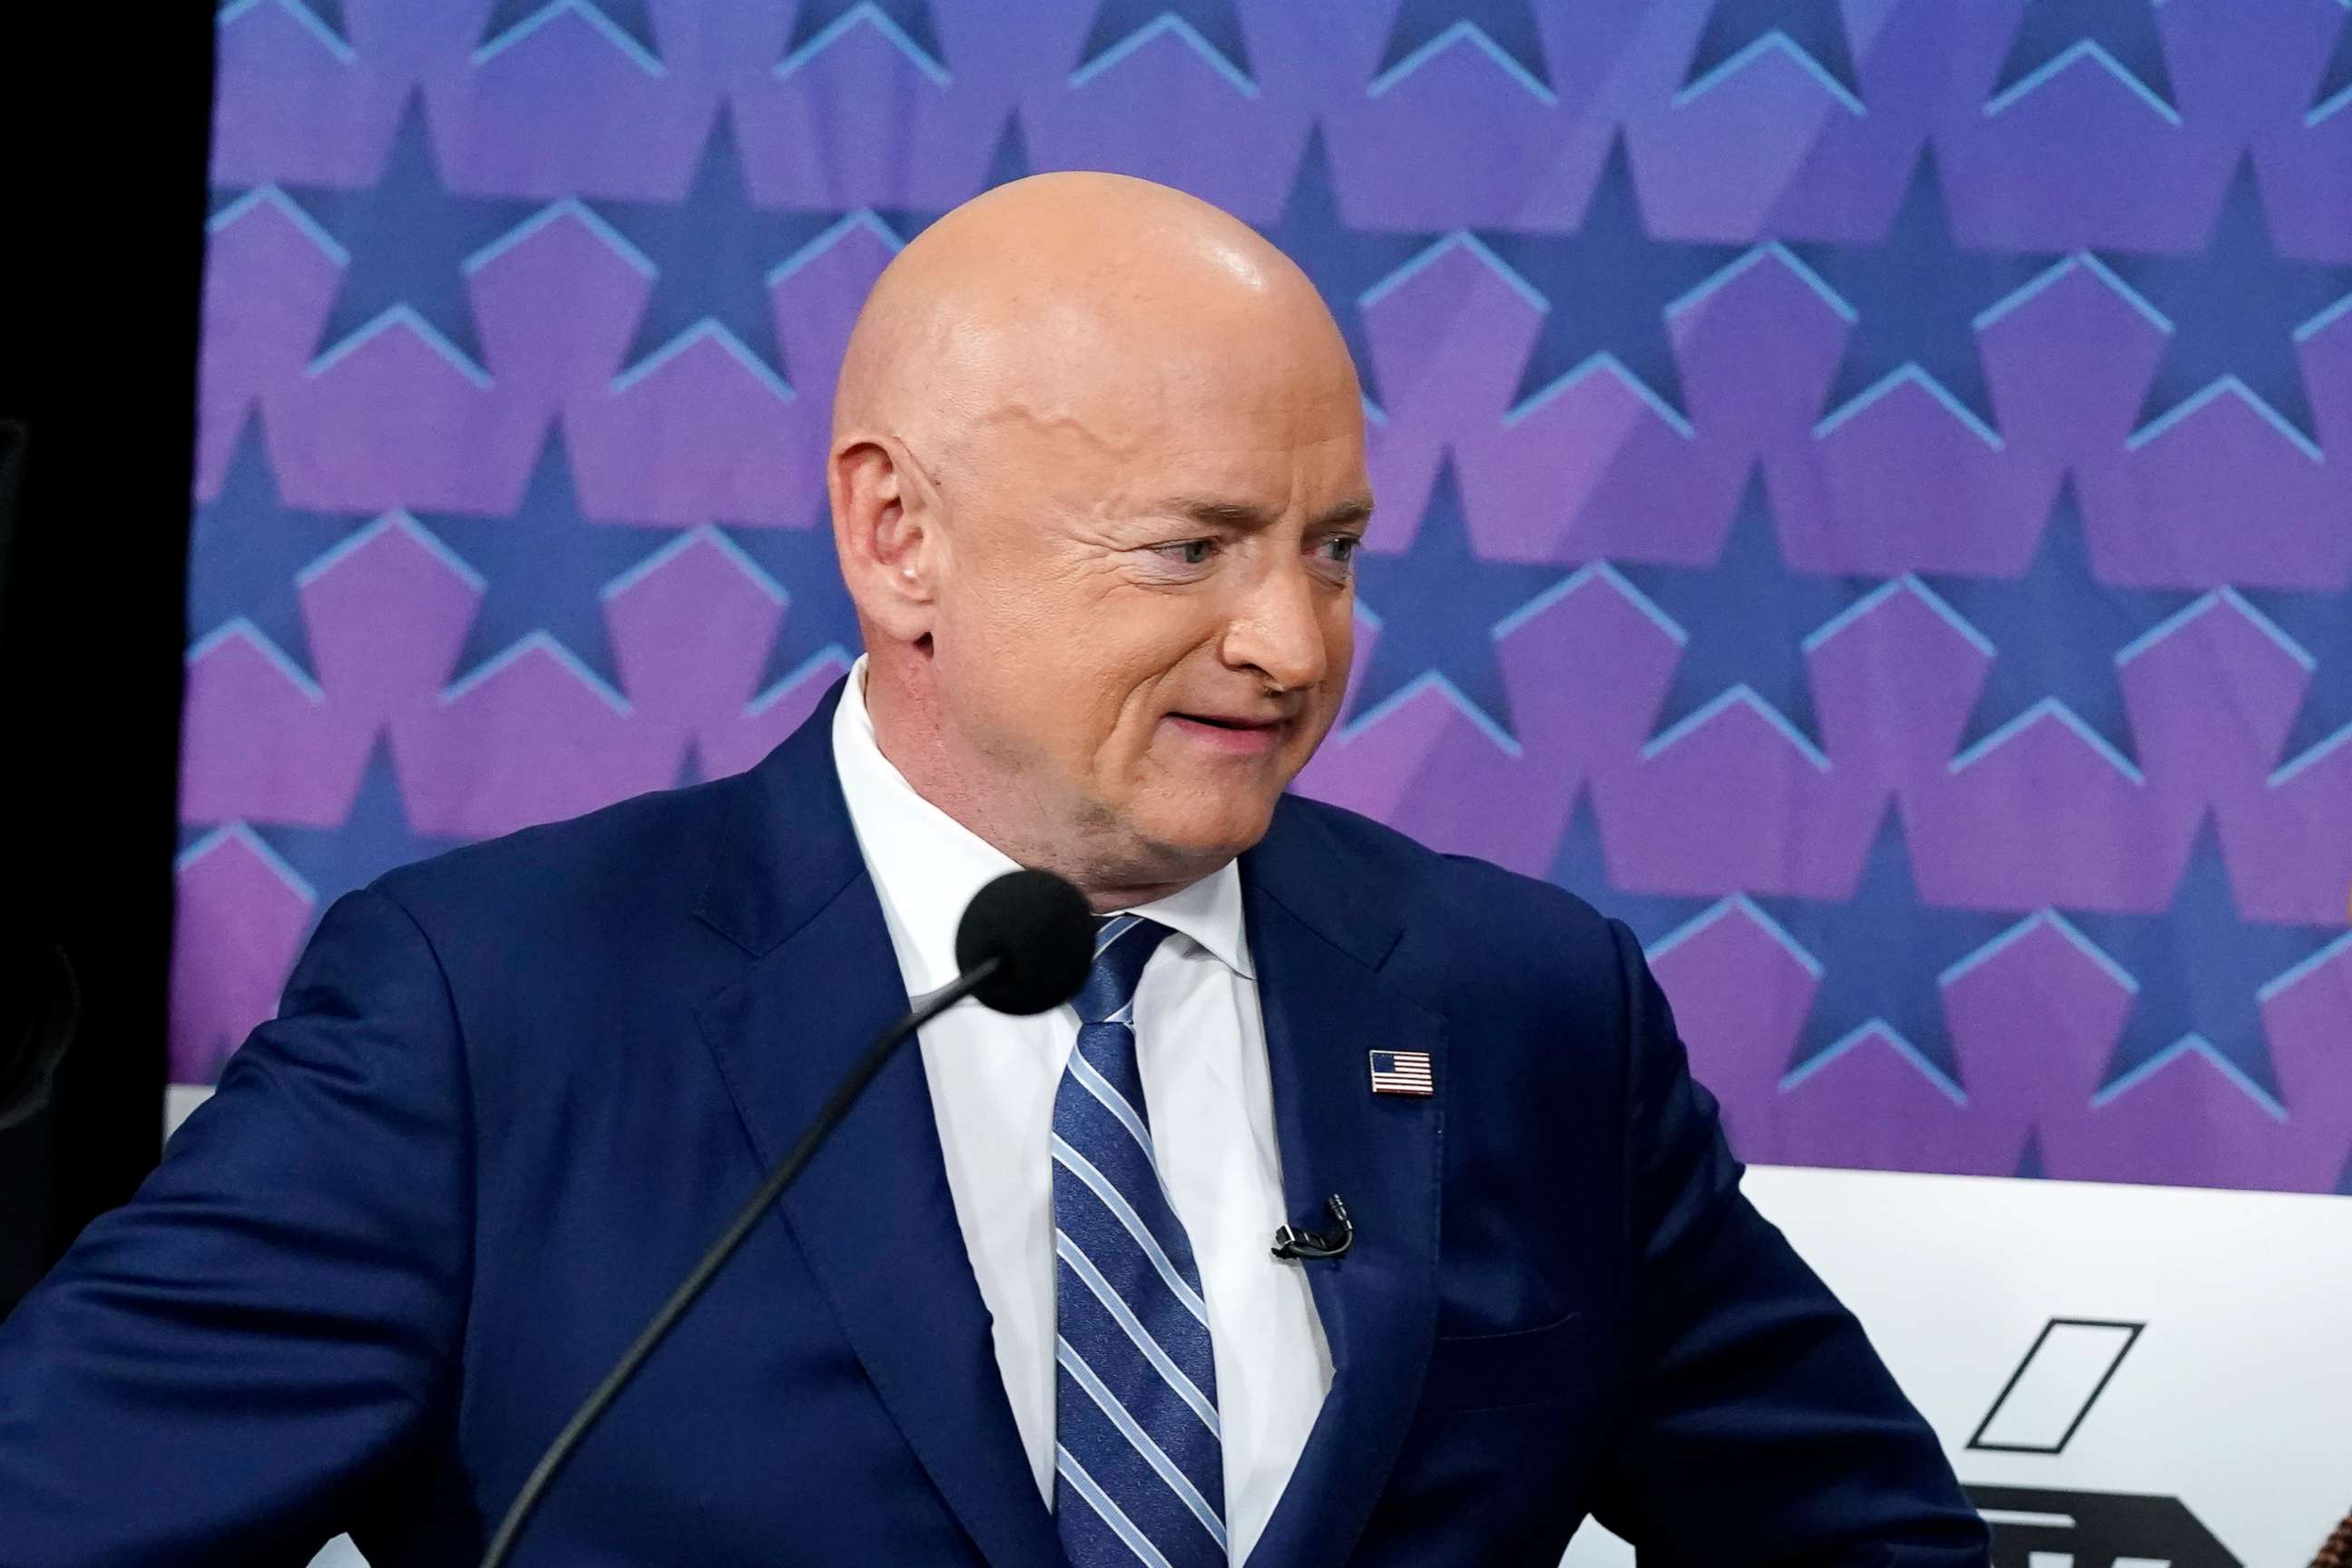 PHOTO: Arizona Democratic Sen. Mark Kelly stands on the stage prior to a televised debate against his Republican challenger Blake Masters and Libertarian candidate Marc Victor in Phoenix, Oct. 6, 2022.